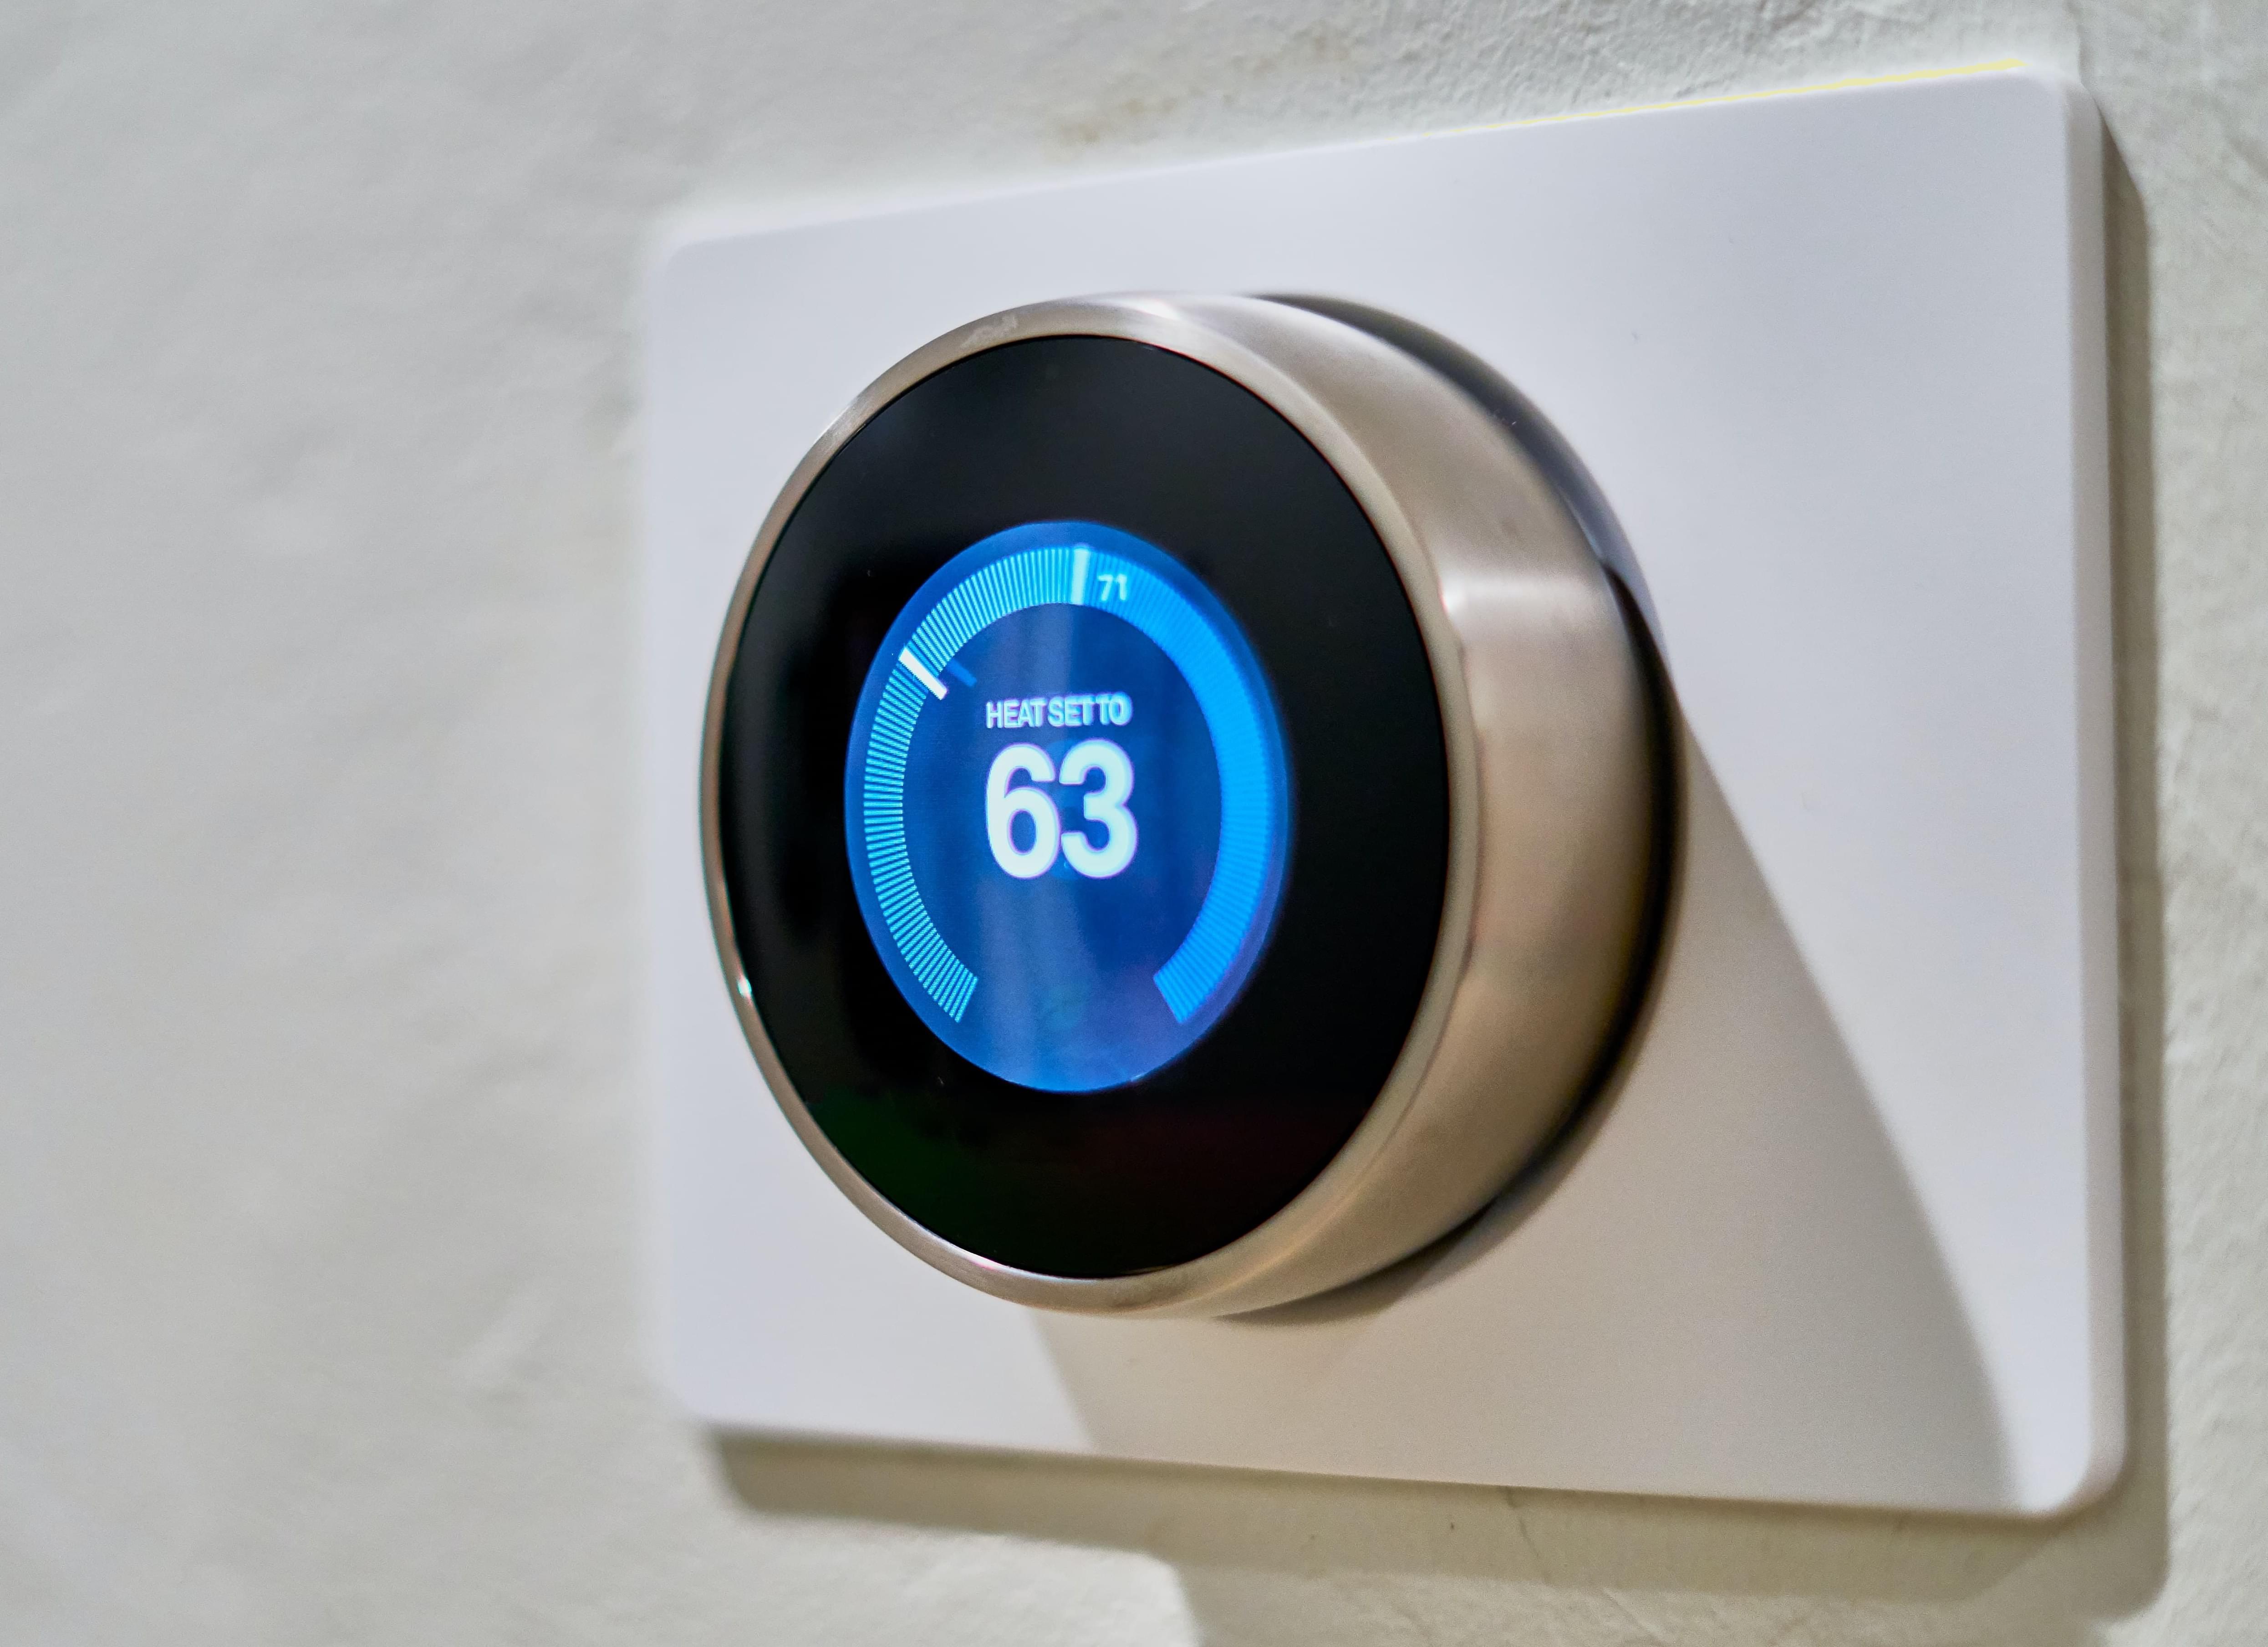 A smart thermostat set to 63